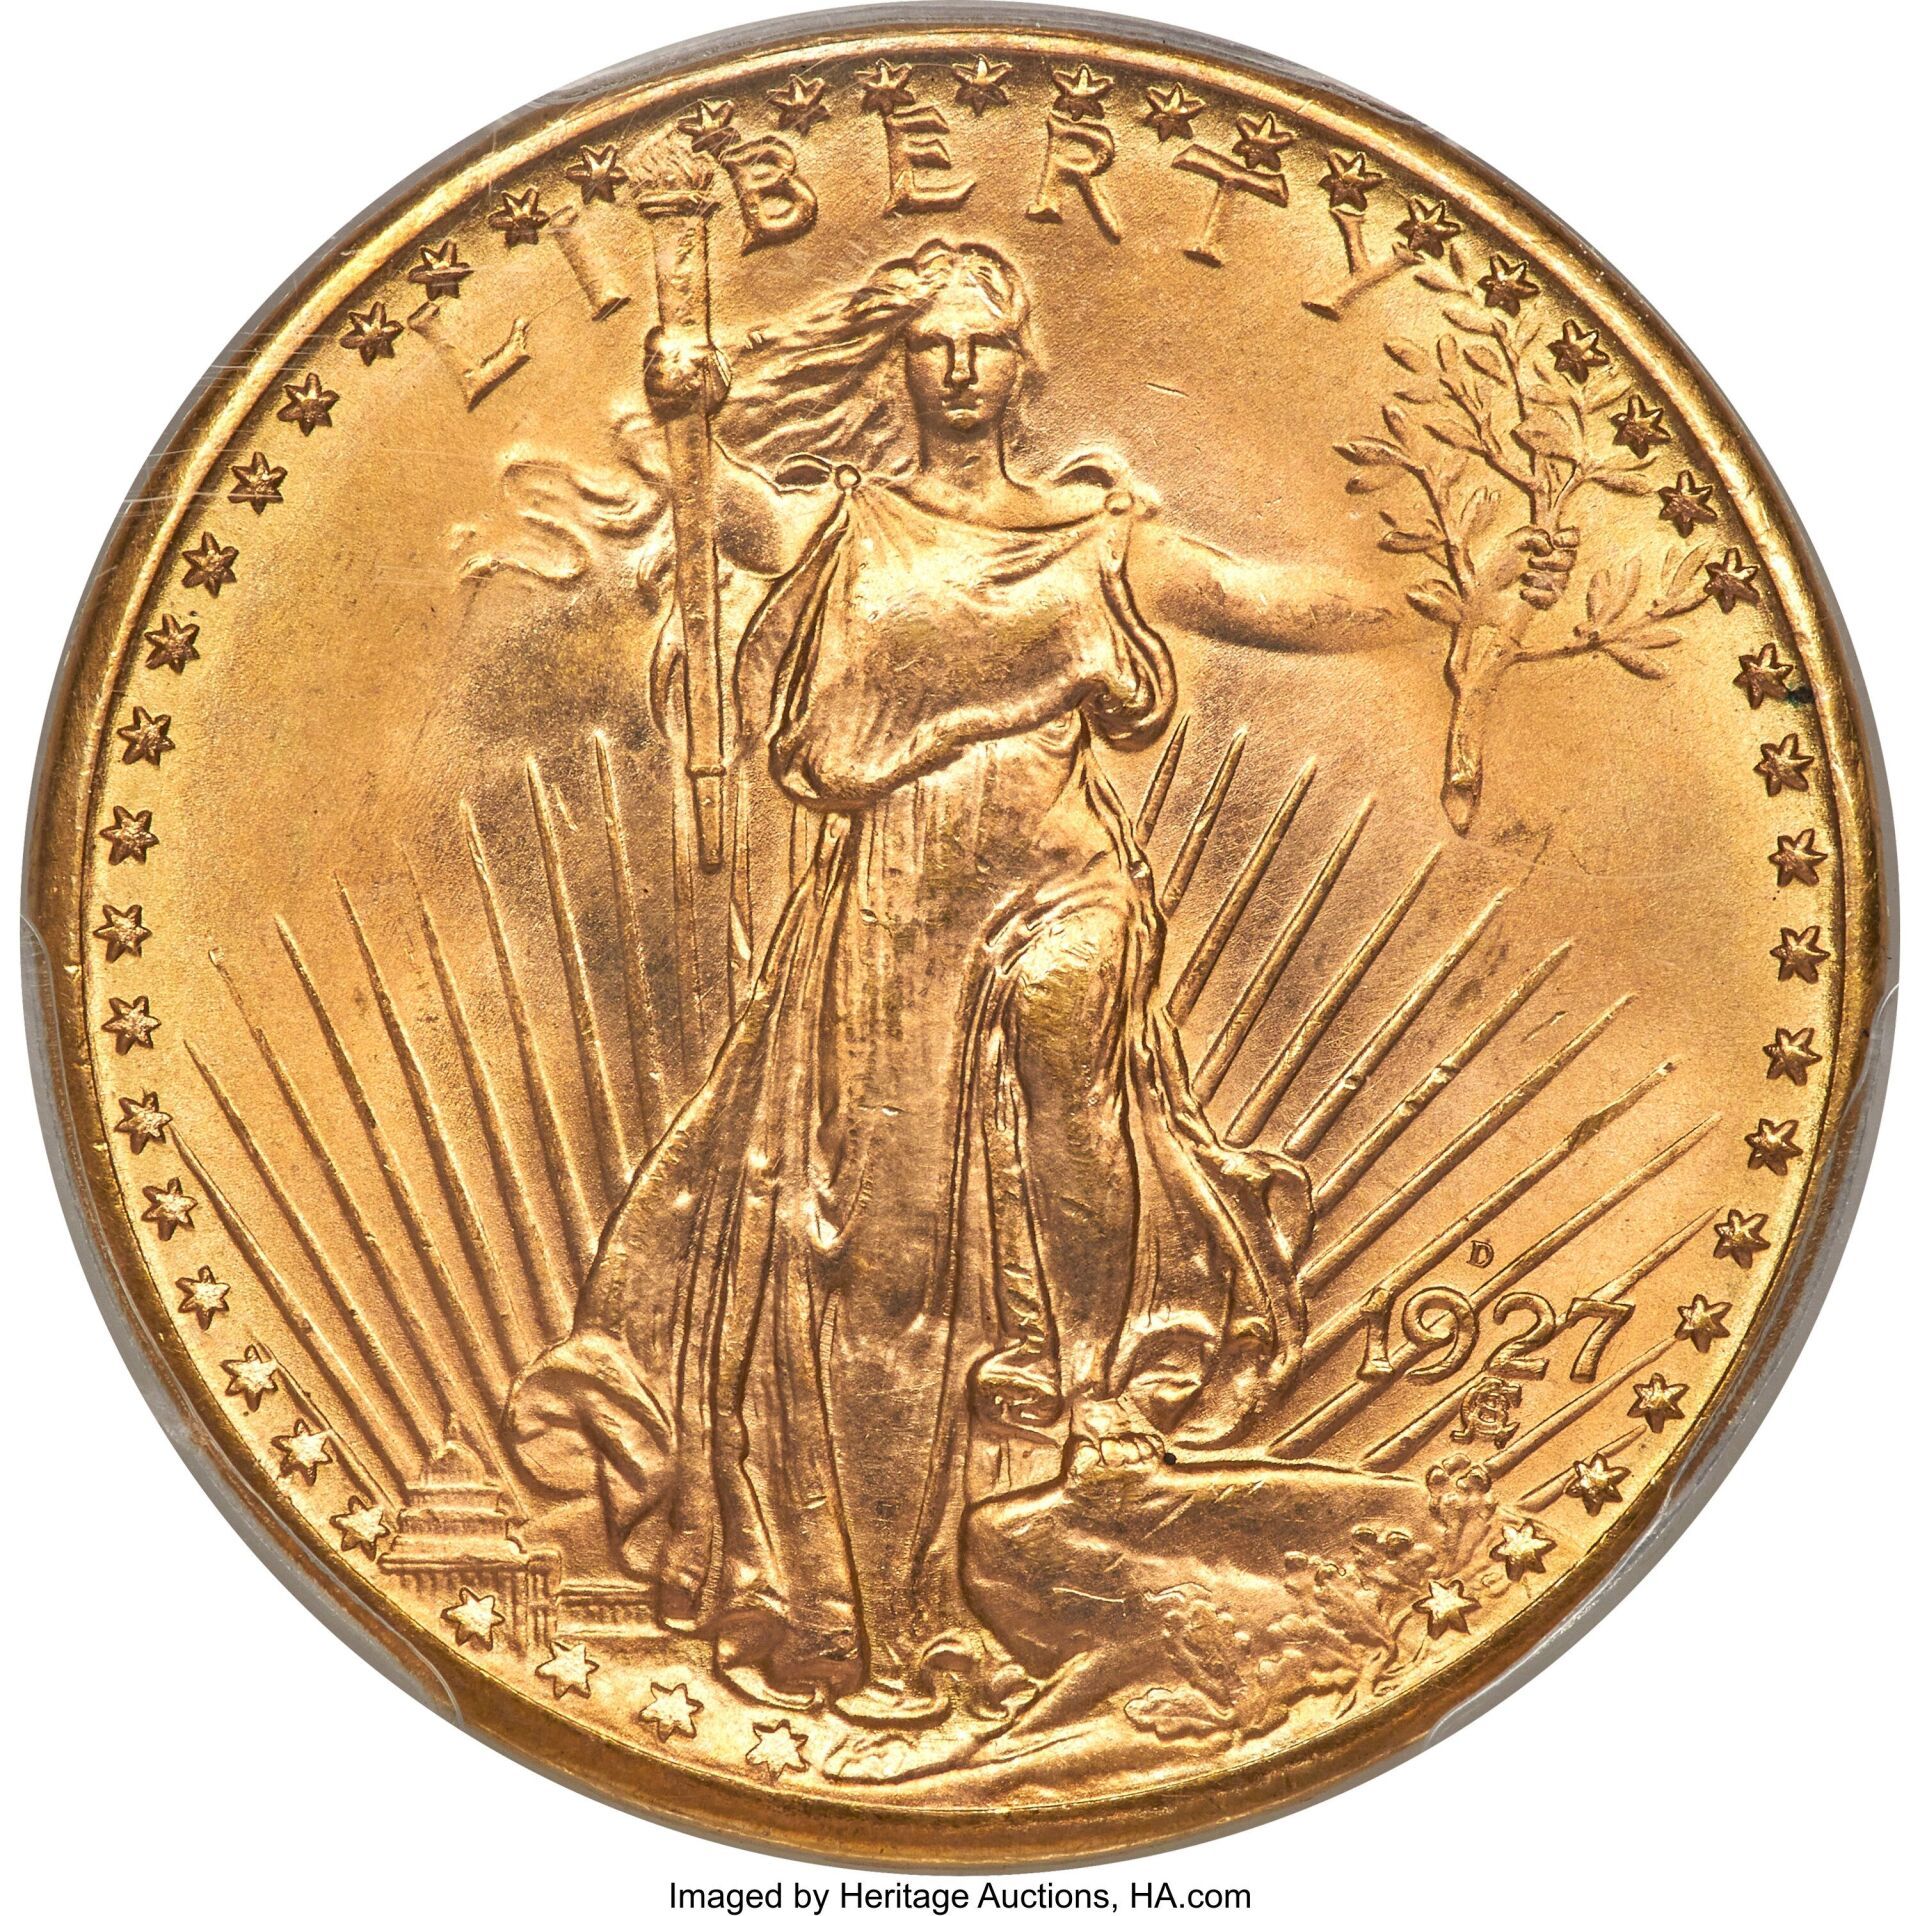 1927-D Double Eagle.  Imaged by Heritage Auctions, HA.com